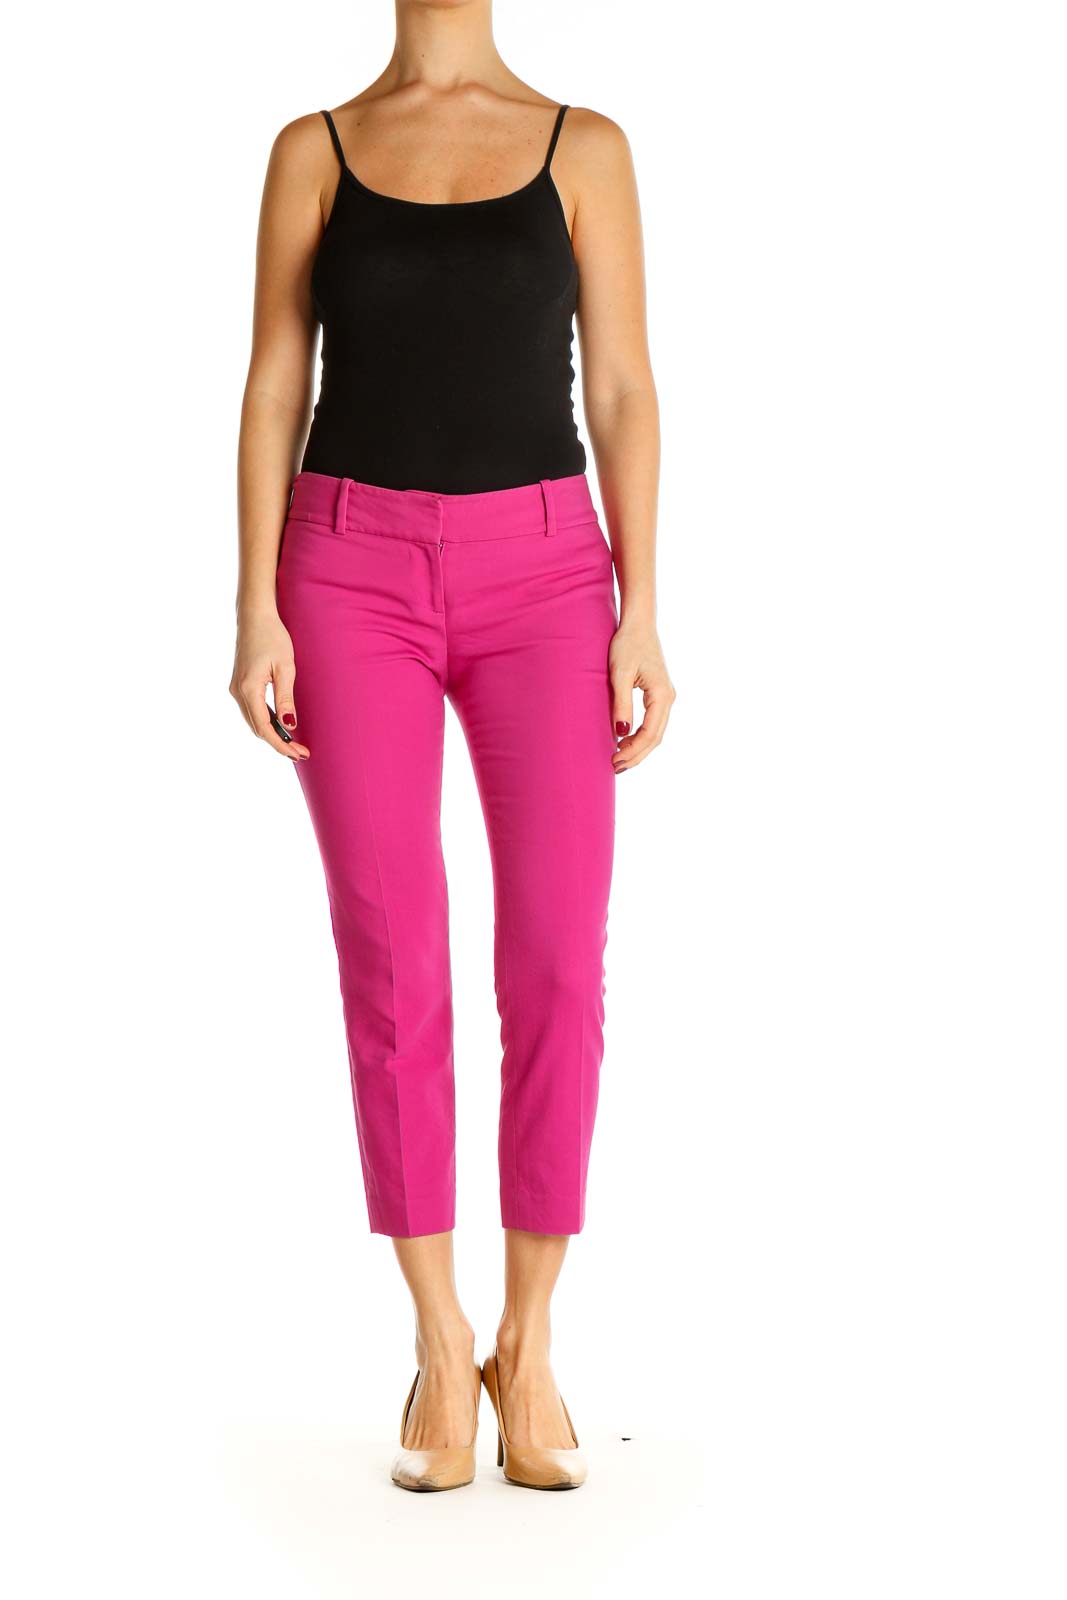 Buy Global Republic Pink Pullover With Tights for Women's Online @ Tata CLiQ